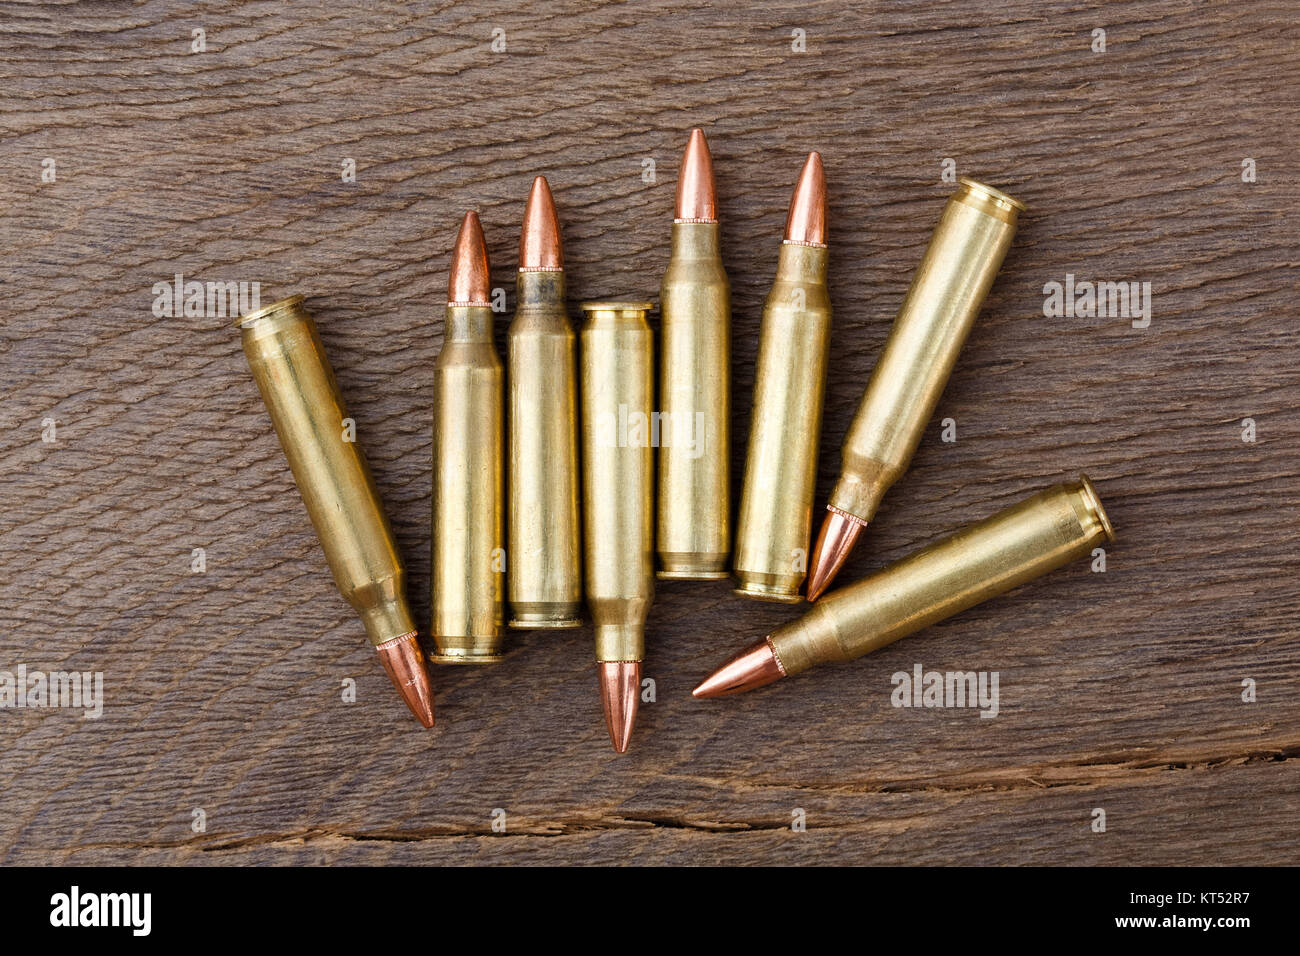 Bullets on rustic wooden background. Stock Photo